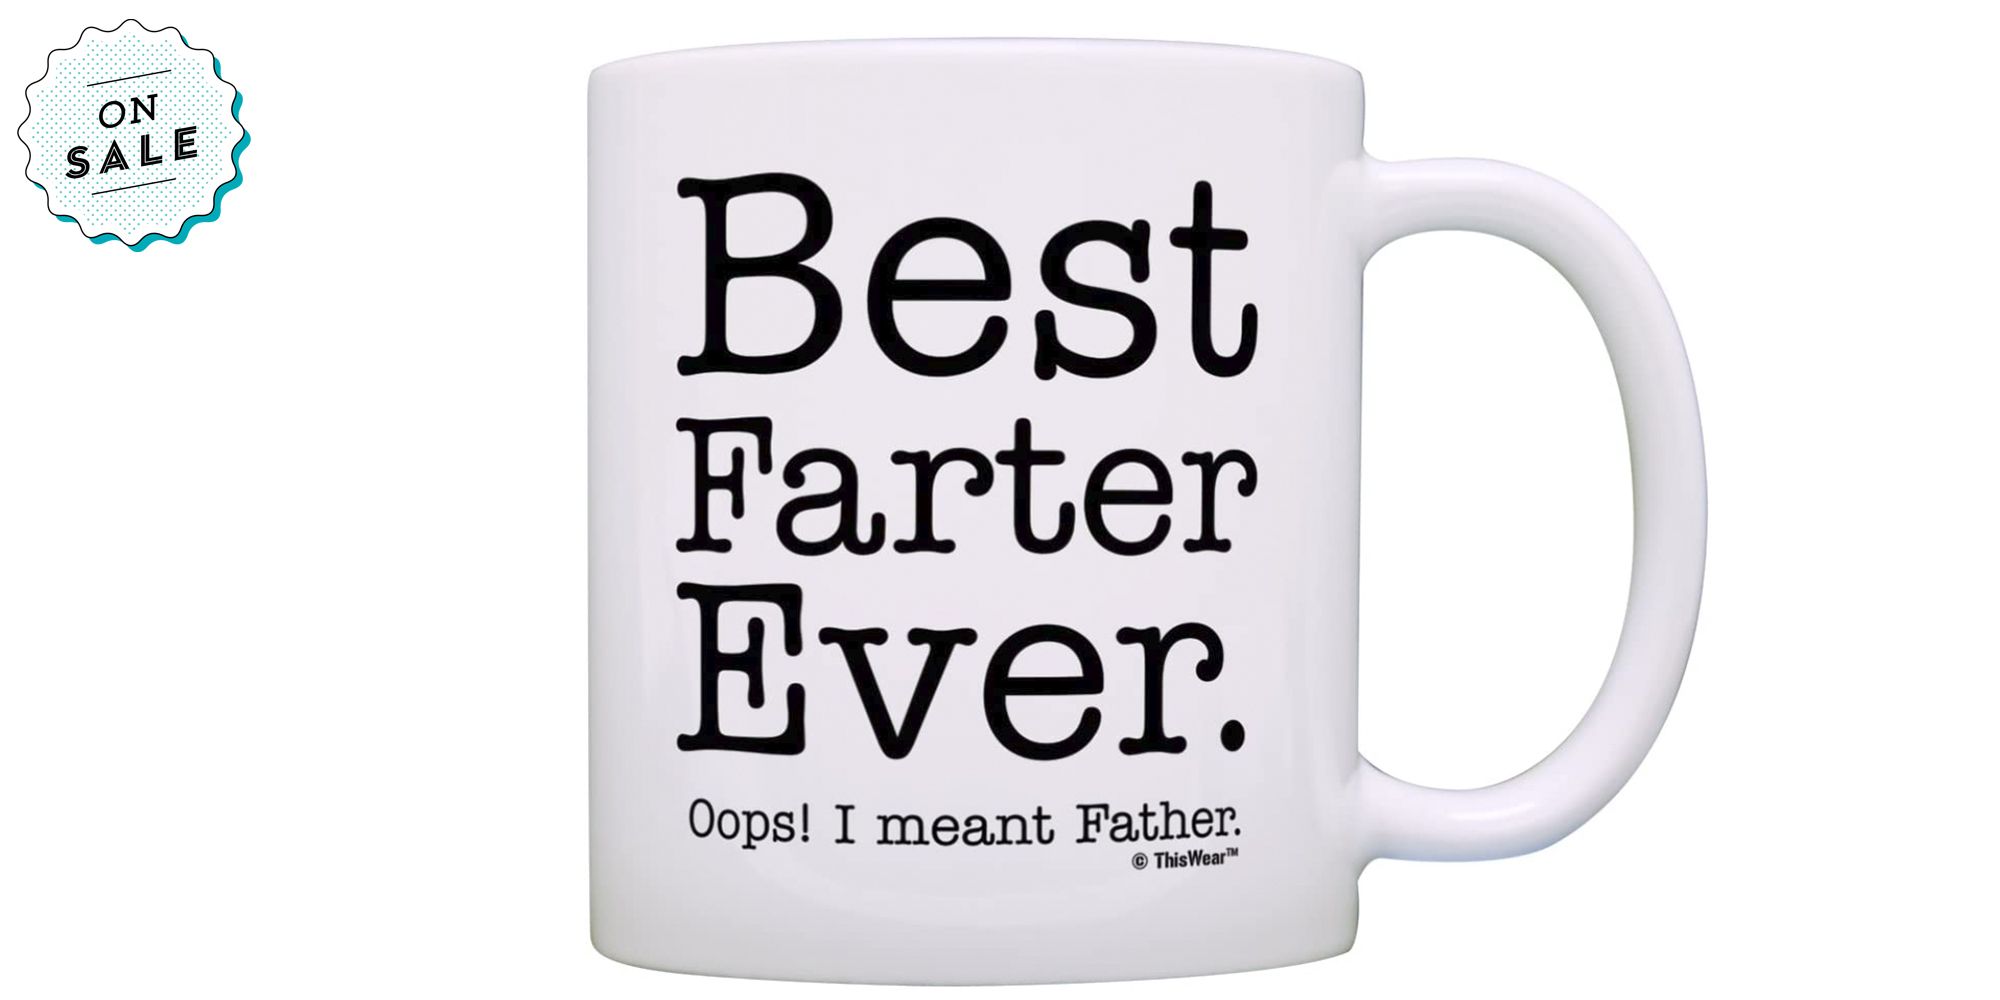 WORLD'S GREATEST FARTER Father/Step Father  DIY Mugs for Father's Day/Birthday 